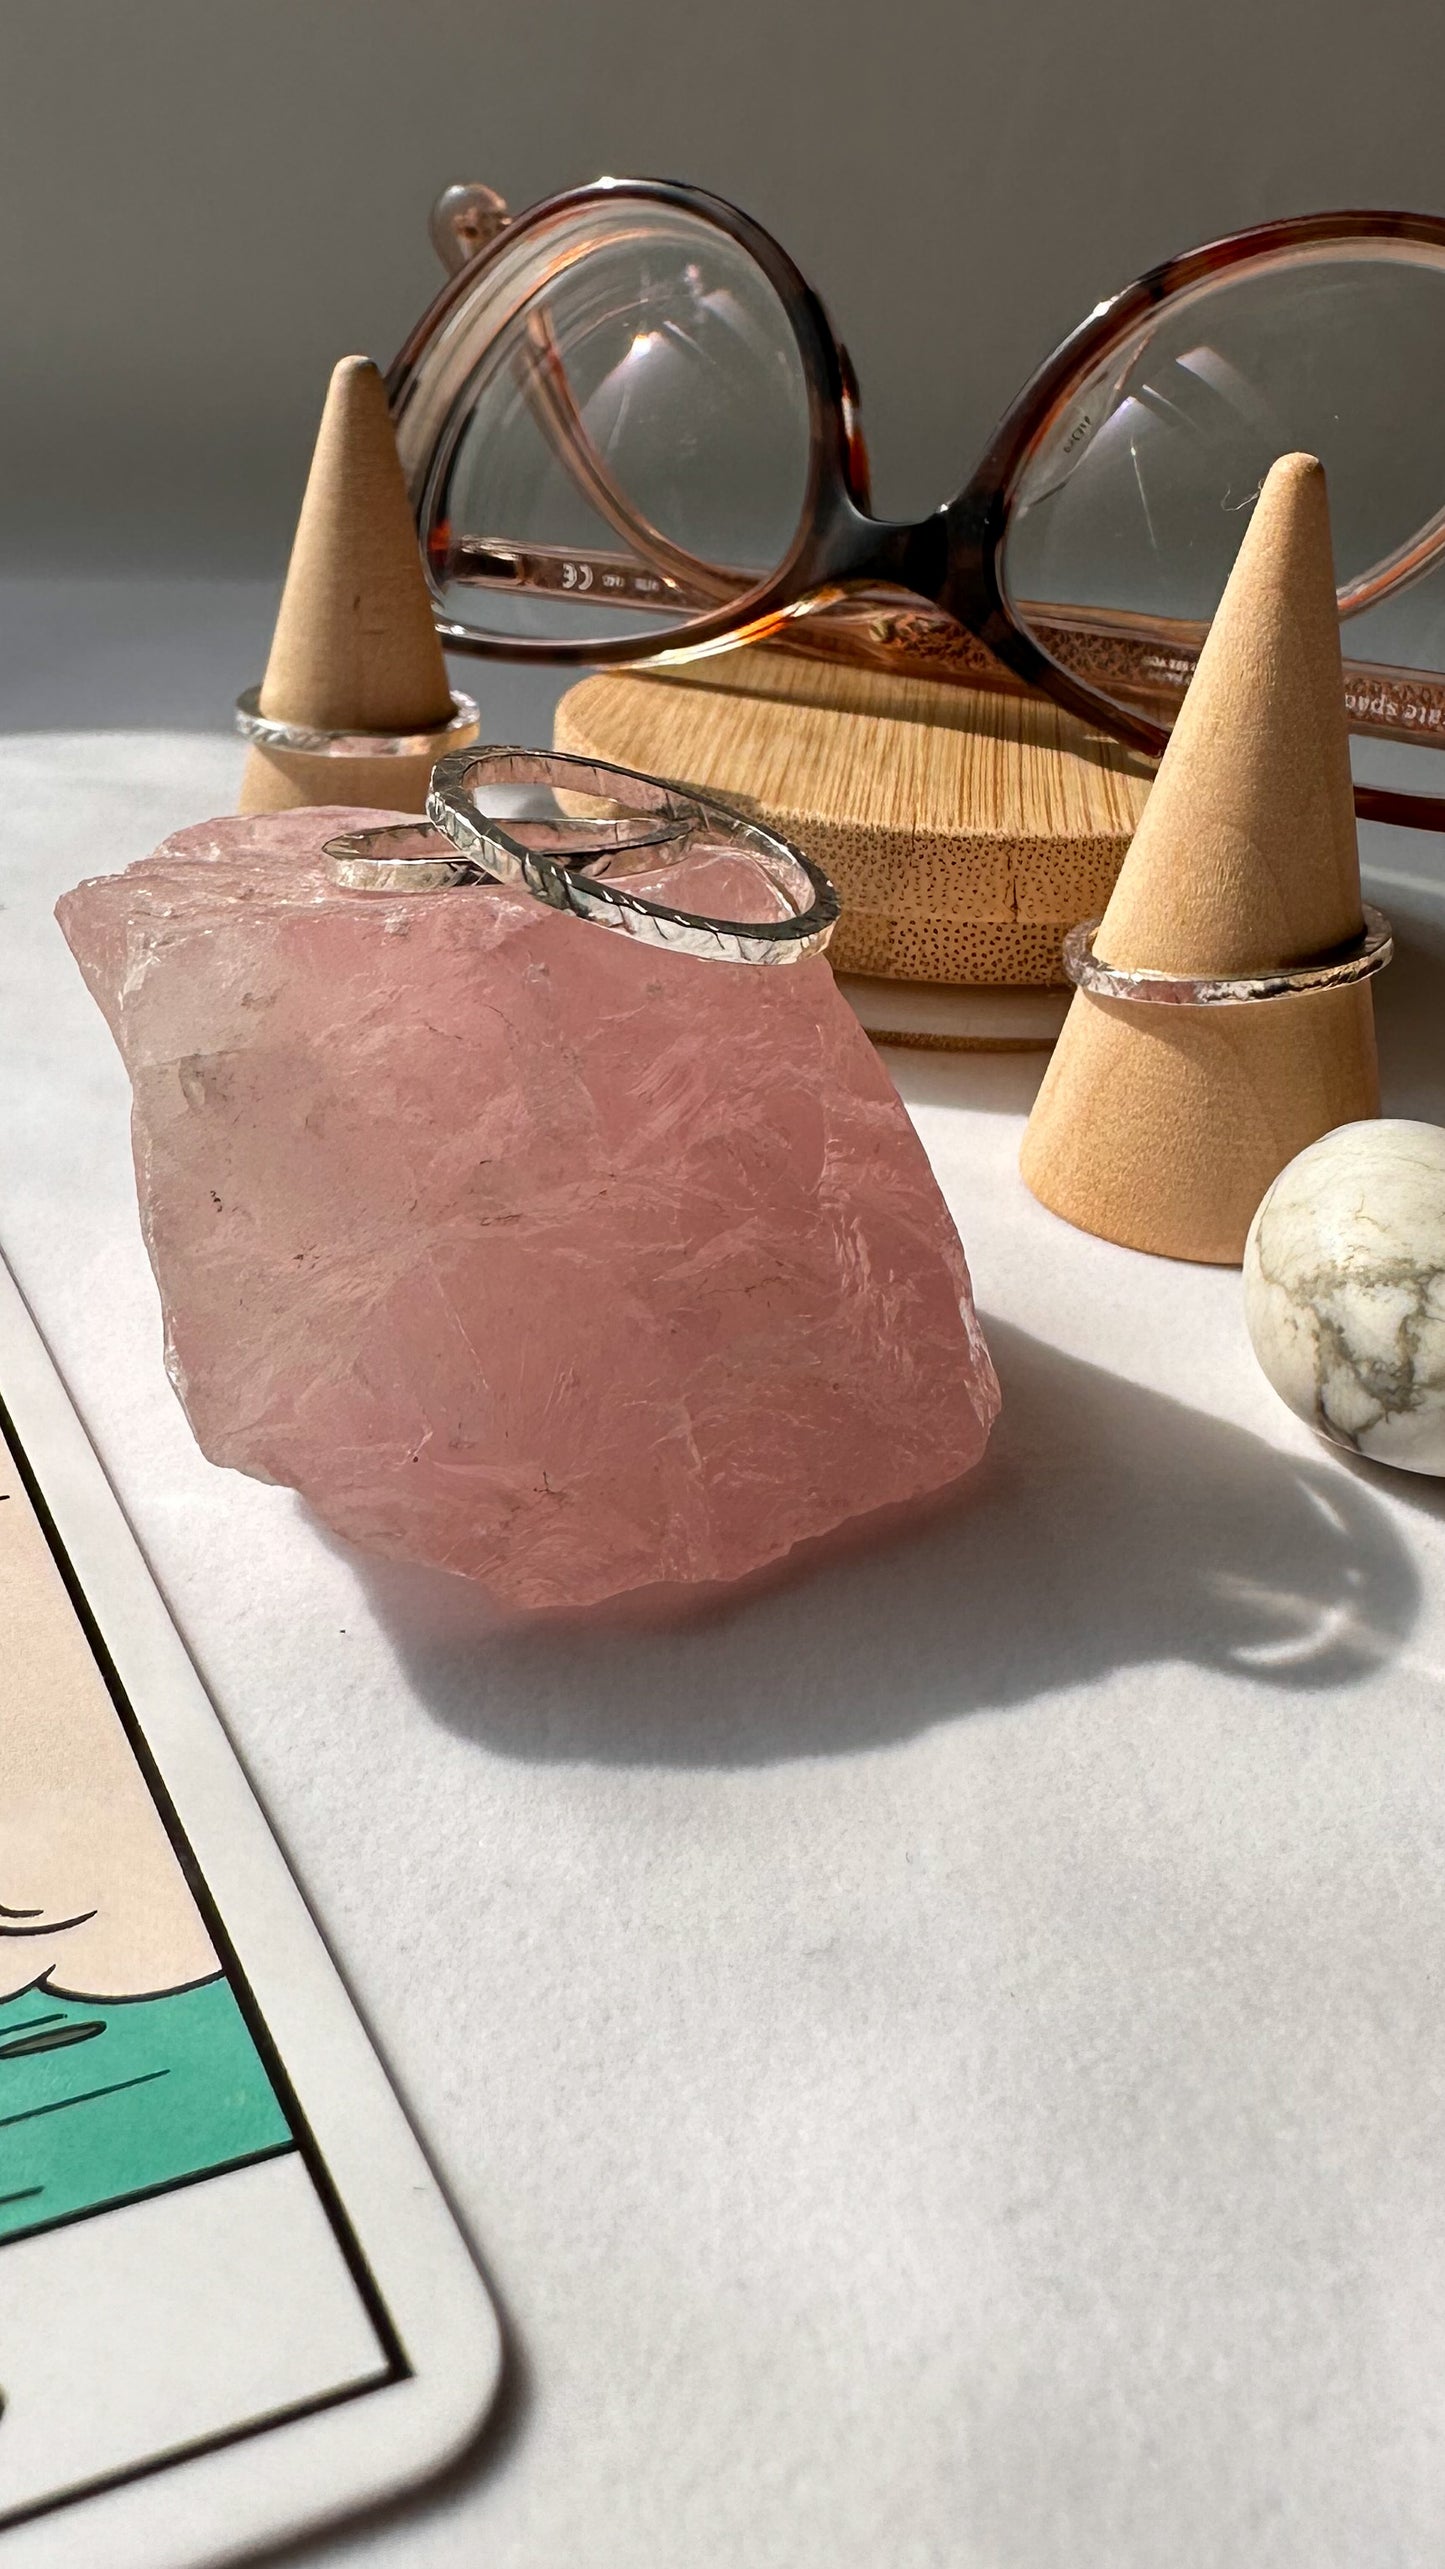 Two hammered texture silver rings are entwined on top of a piece of rose quartz. In the background two more silver hammered rings are on wooden cones. A pair of eyeglasses, a small howlite stone and the corner of a tarot card is visible.